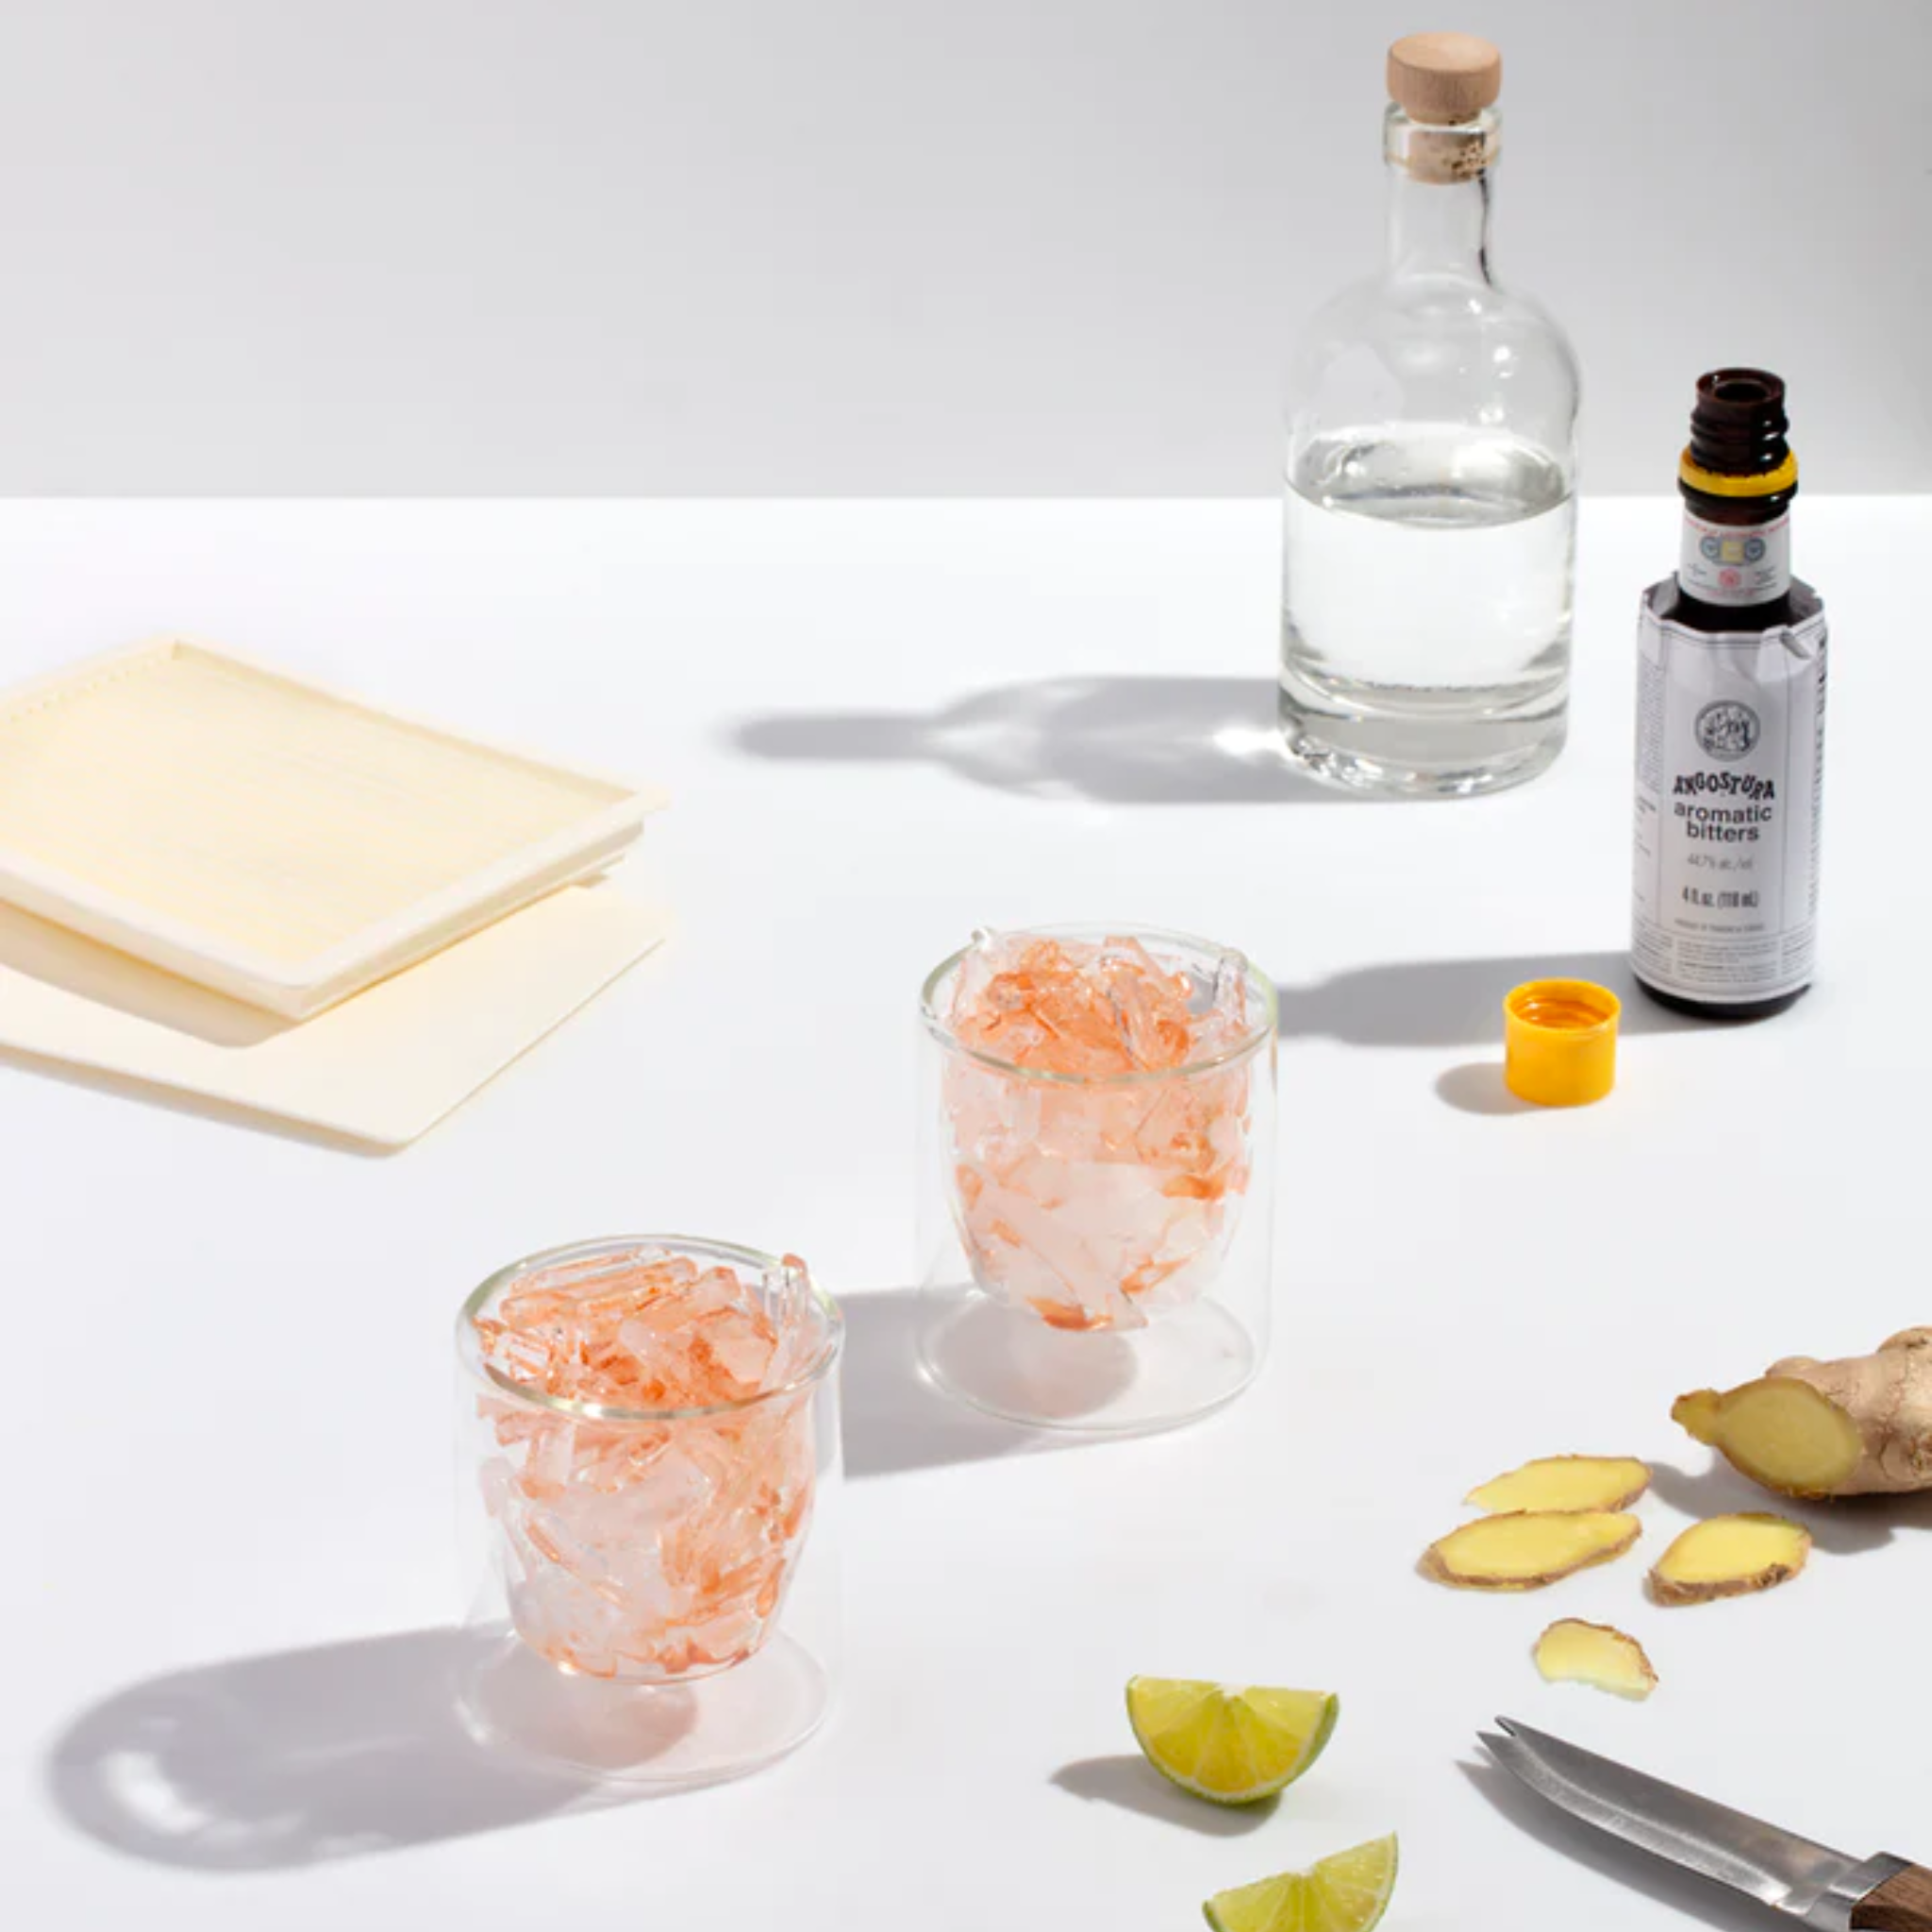 W&P Crystal Cocktail Ice Tray